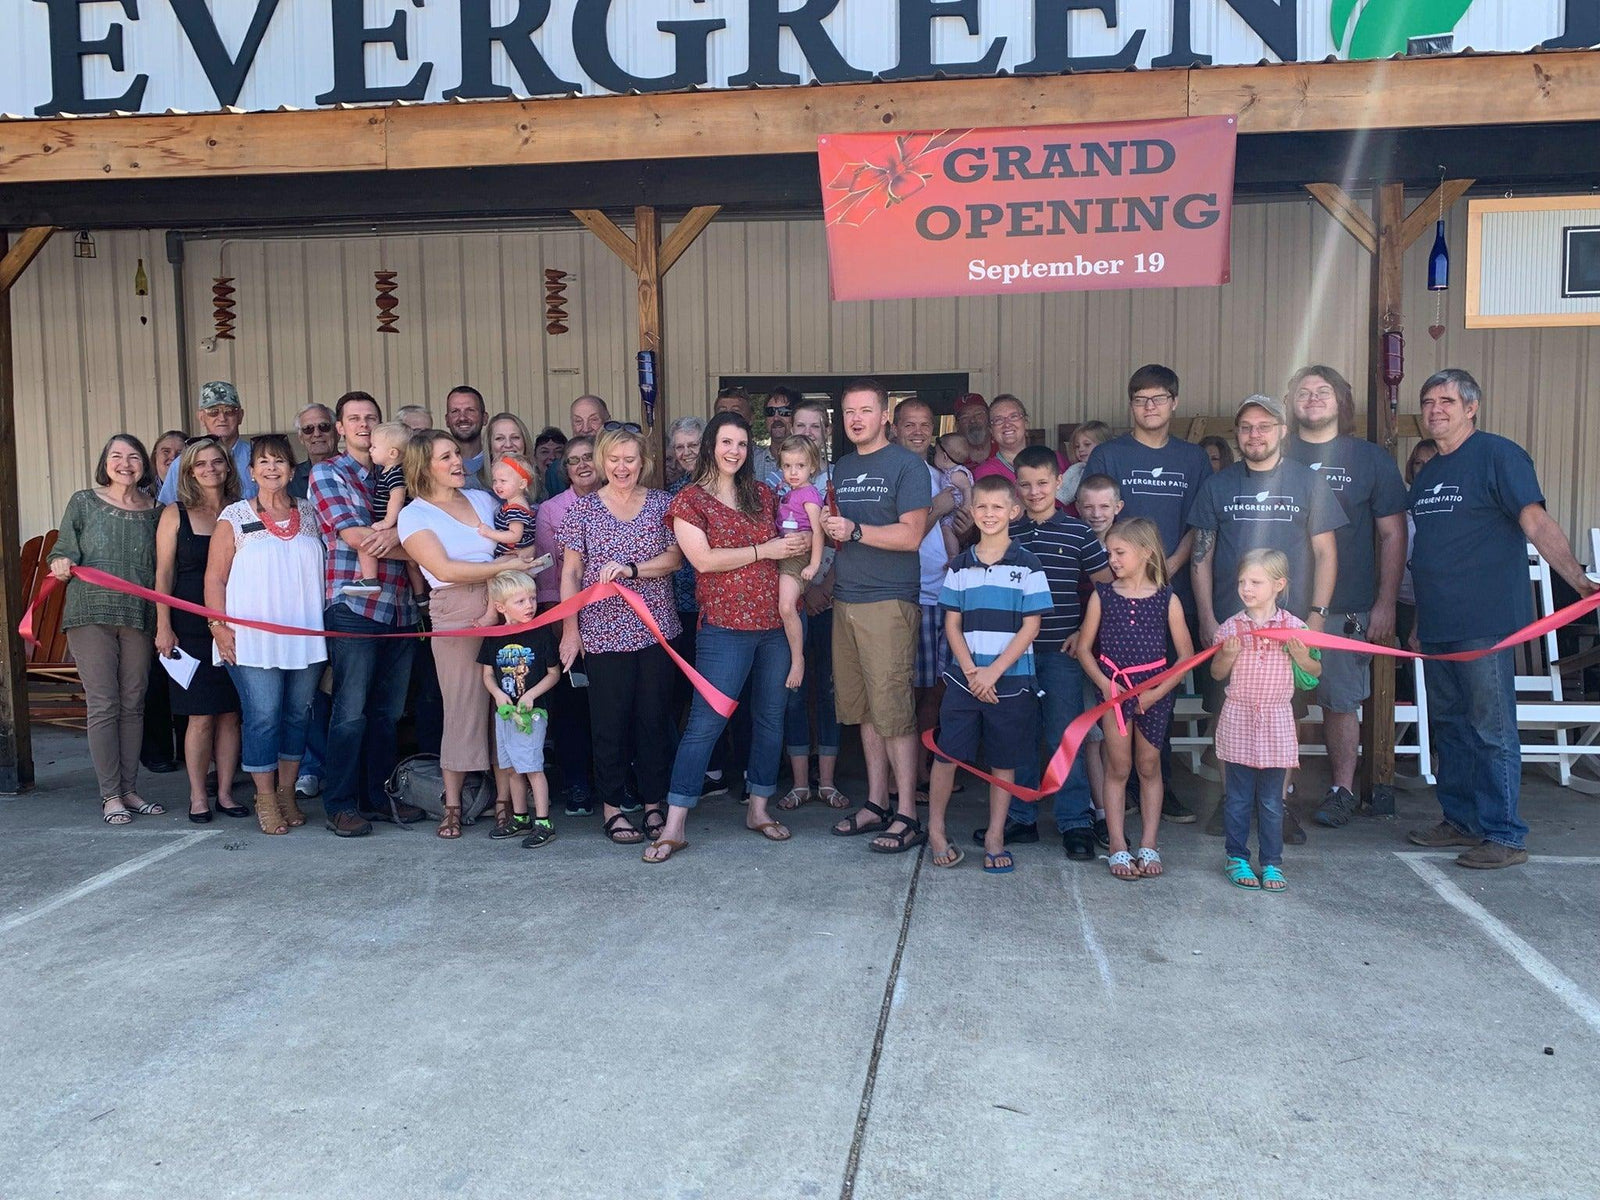 Evergreen Patio officially opened in Cave Spring, Sept. 19th. - Evergreen Patio